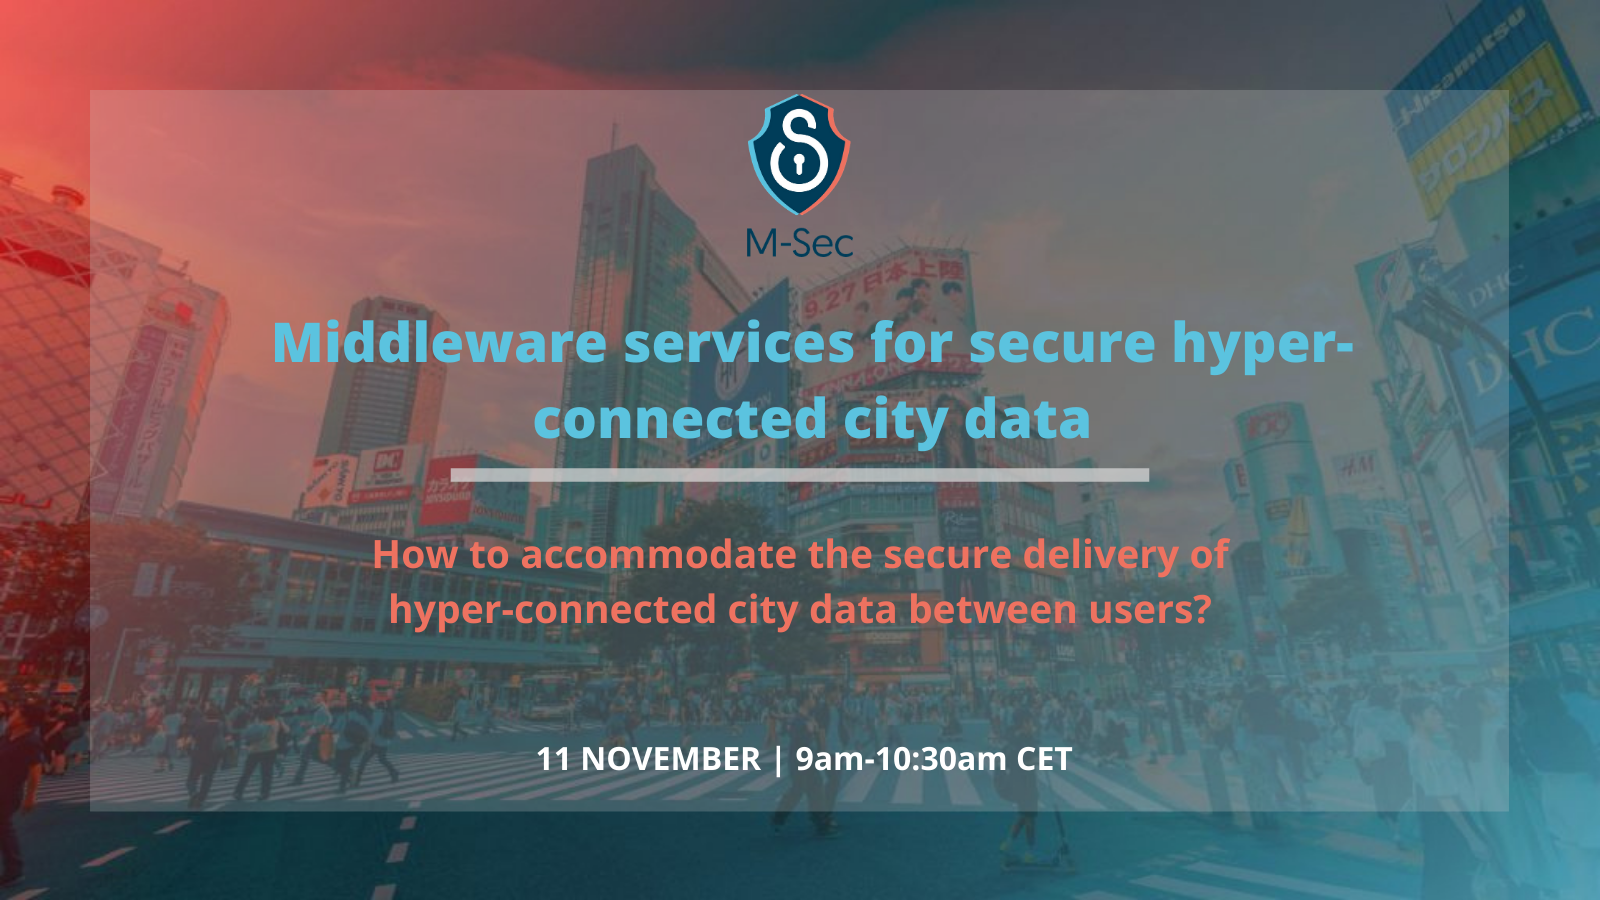 Want to know more about how to accommodate the secure delivery of hyper-connected city data between users?